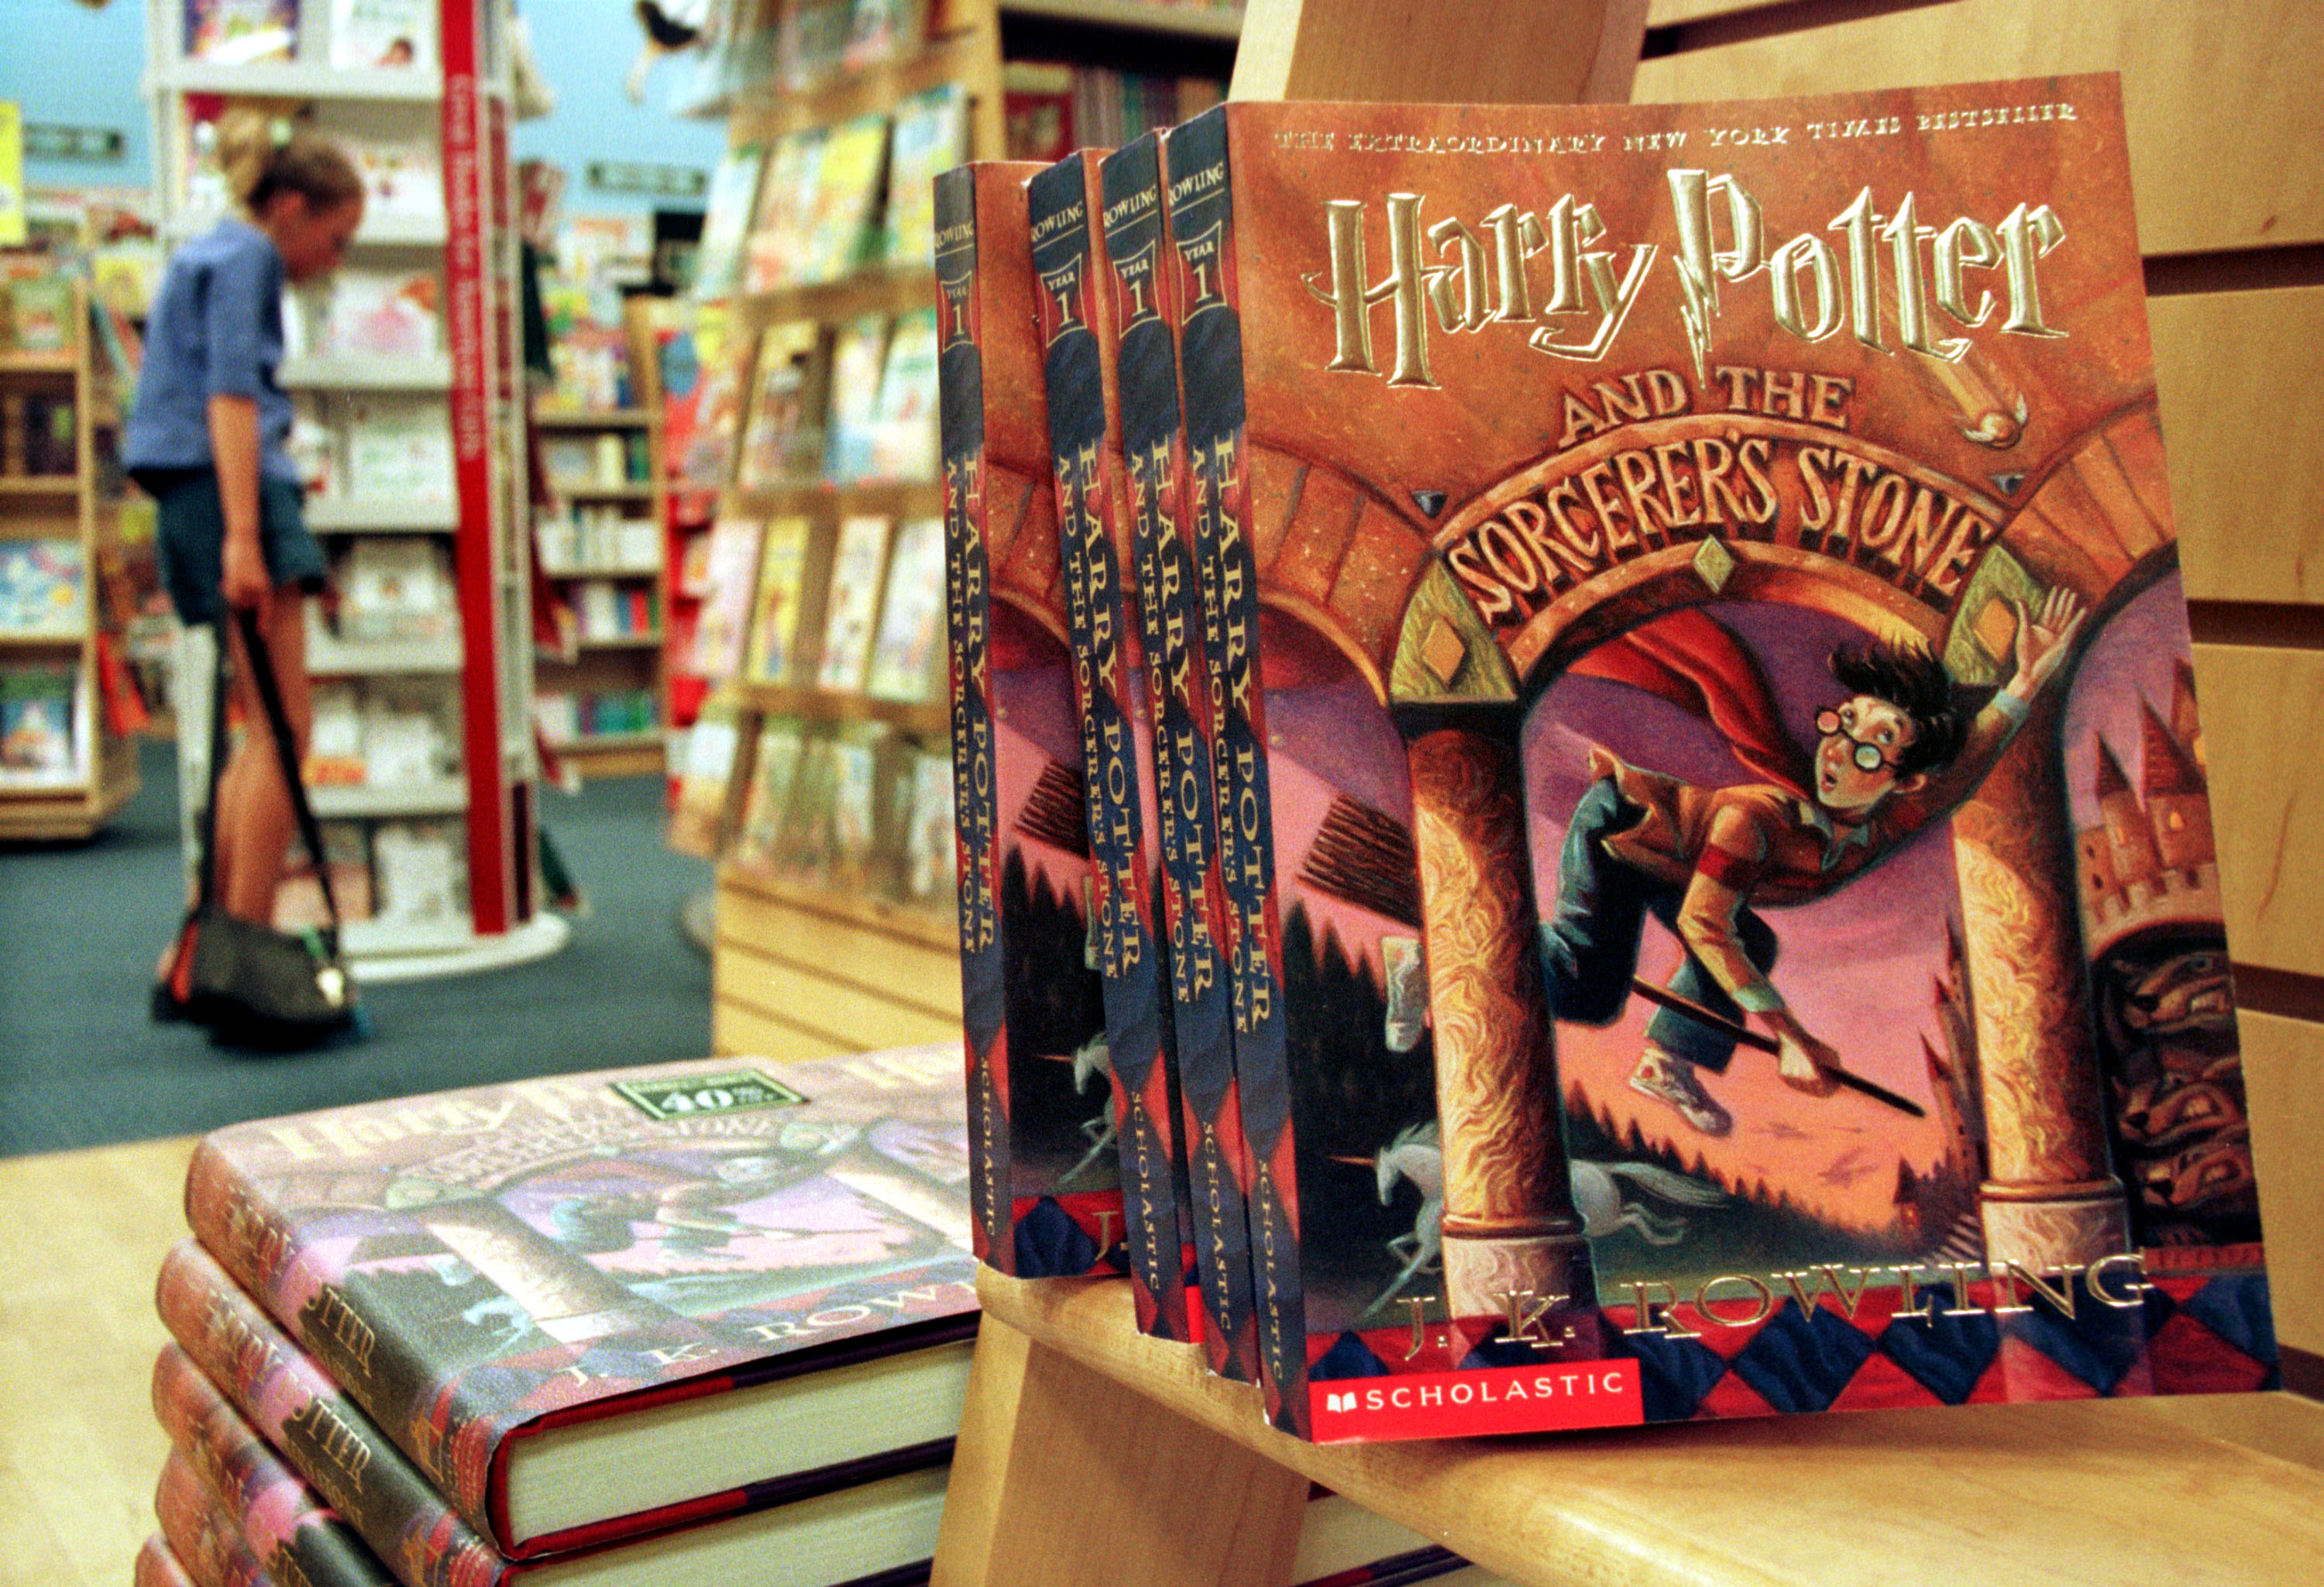 BookTok authors drive surge in profits for Harry Potter publisher